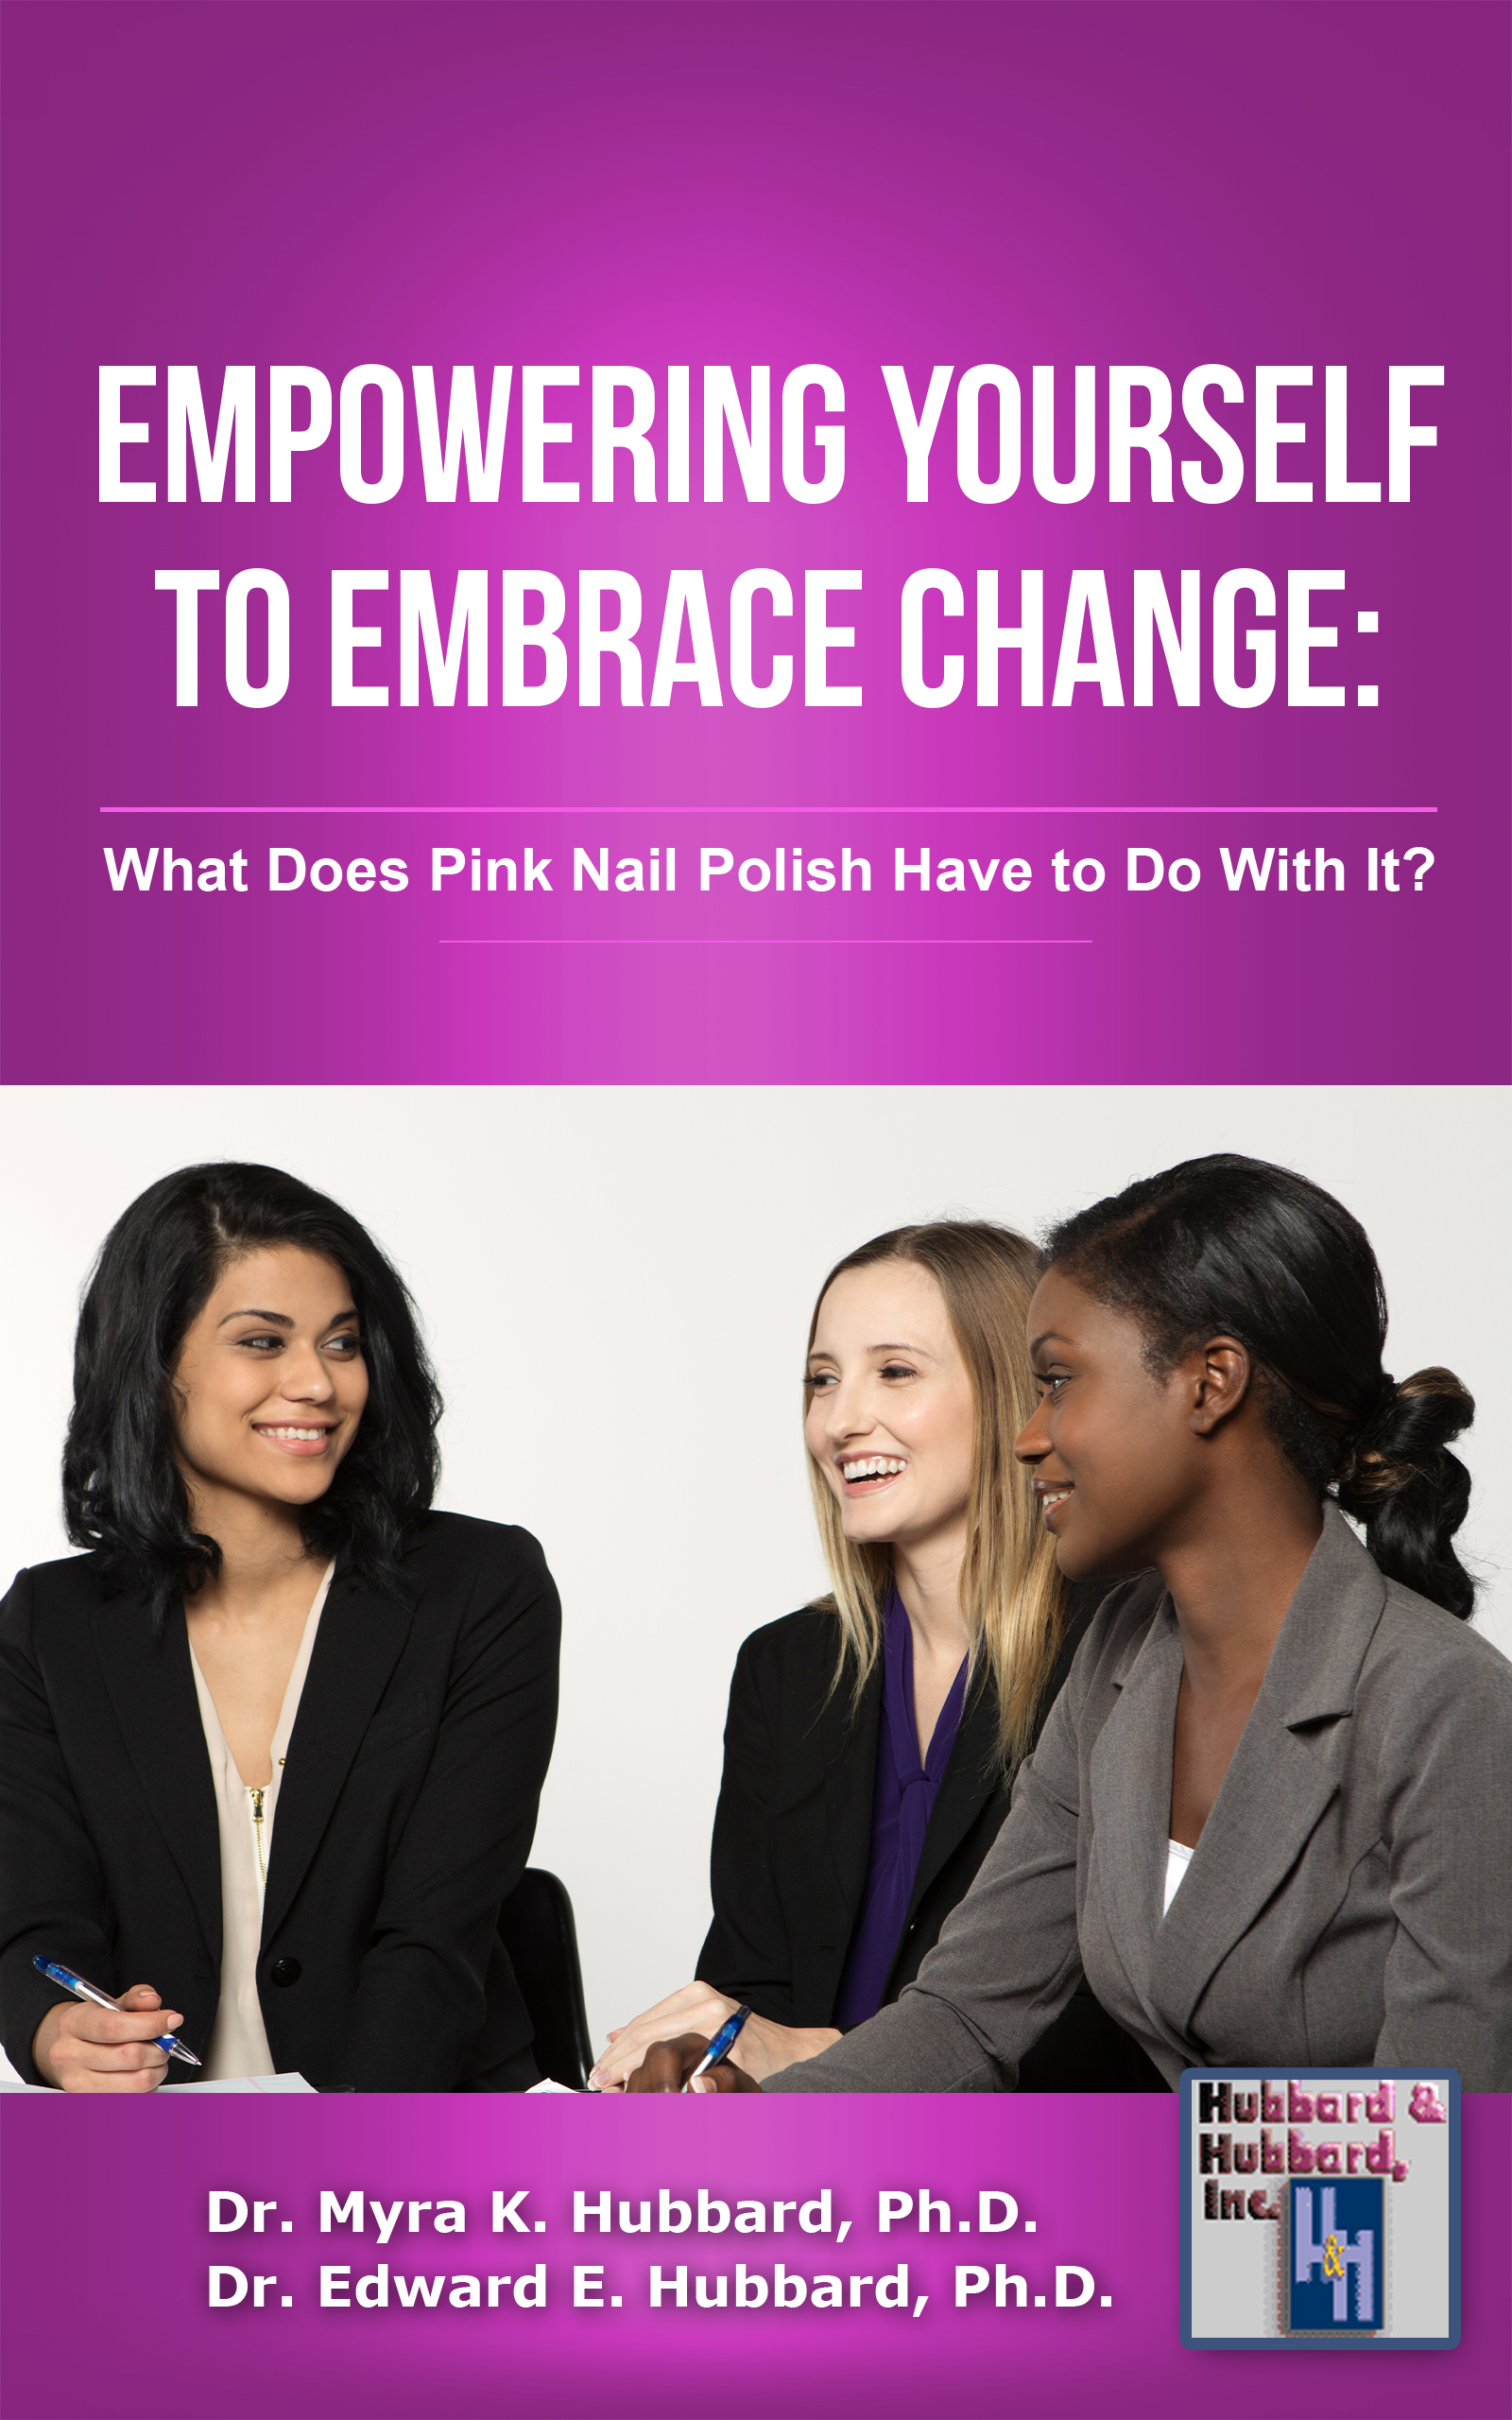 E-Book: Empowering Yourself to Embrace Change